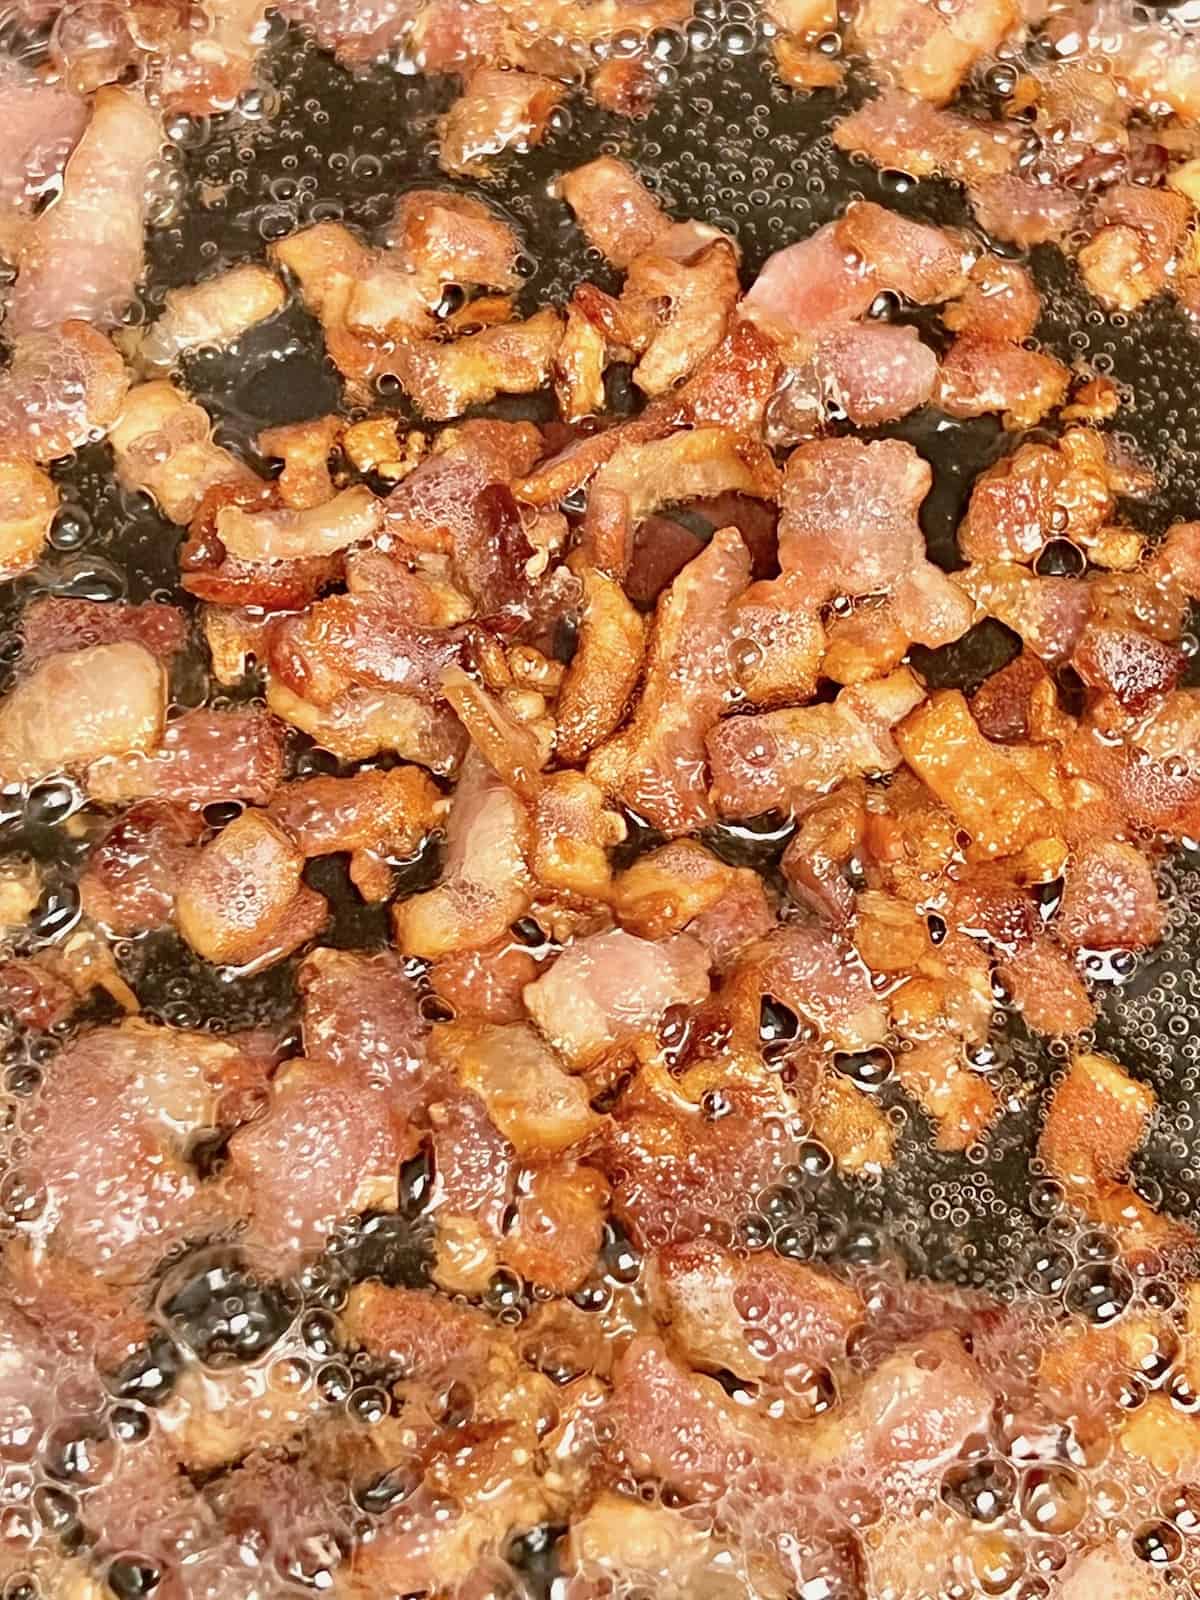 Bacon fried up in the pan.